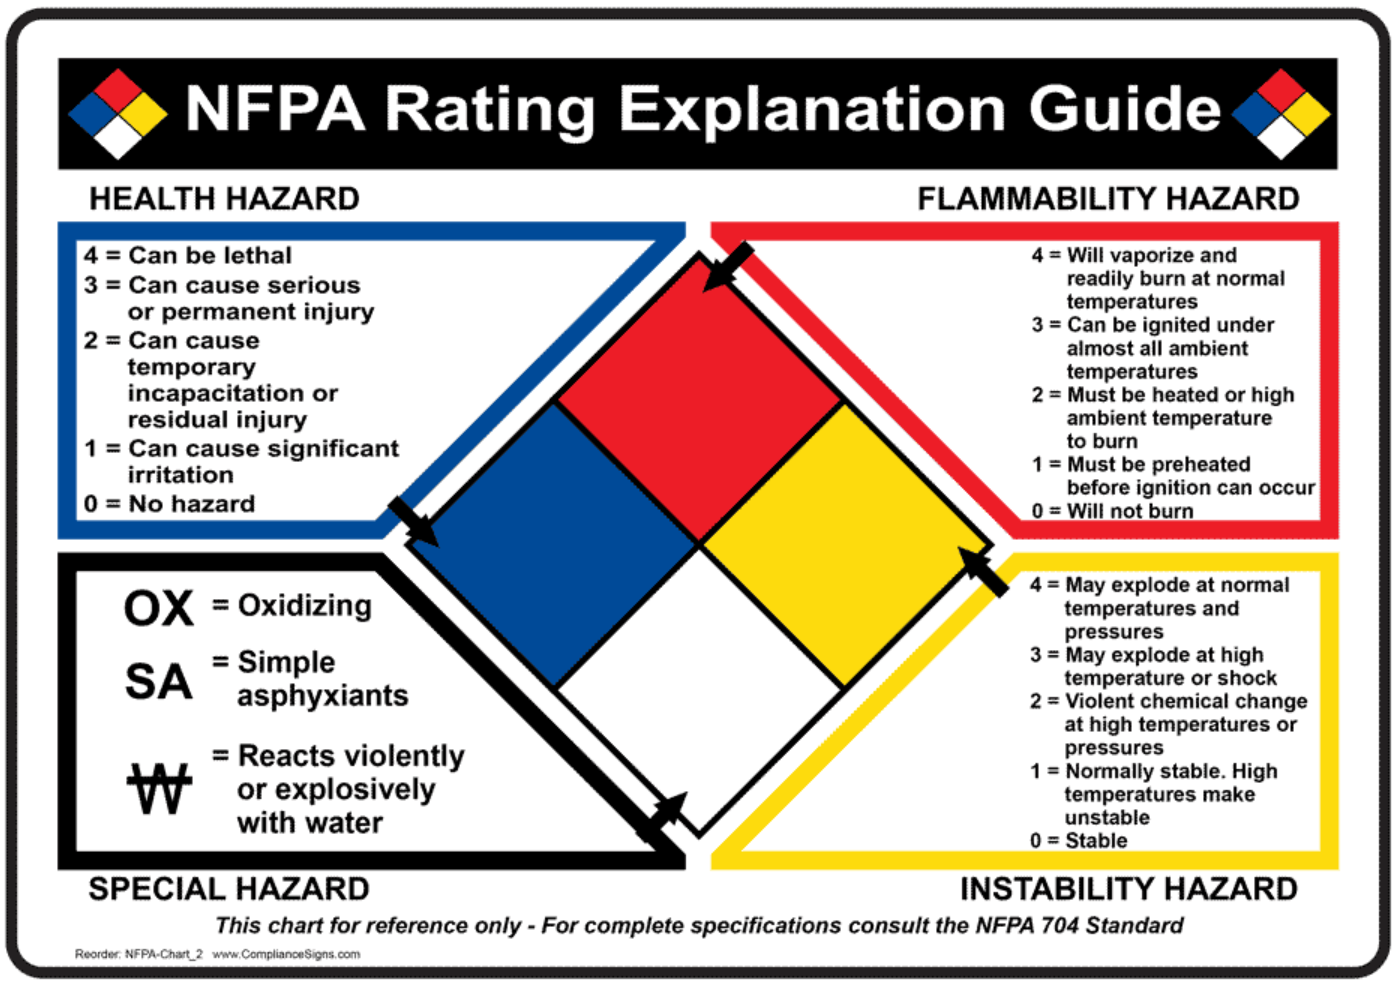 Describes the NFPA Rating Explanation Guide, detailing the 4 hazards described by the hazard diamond.